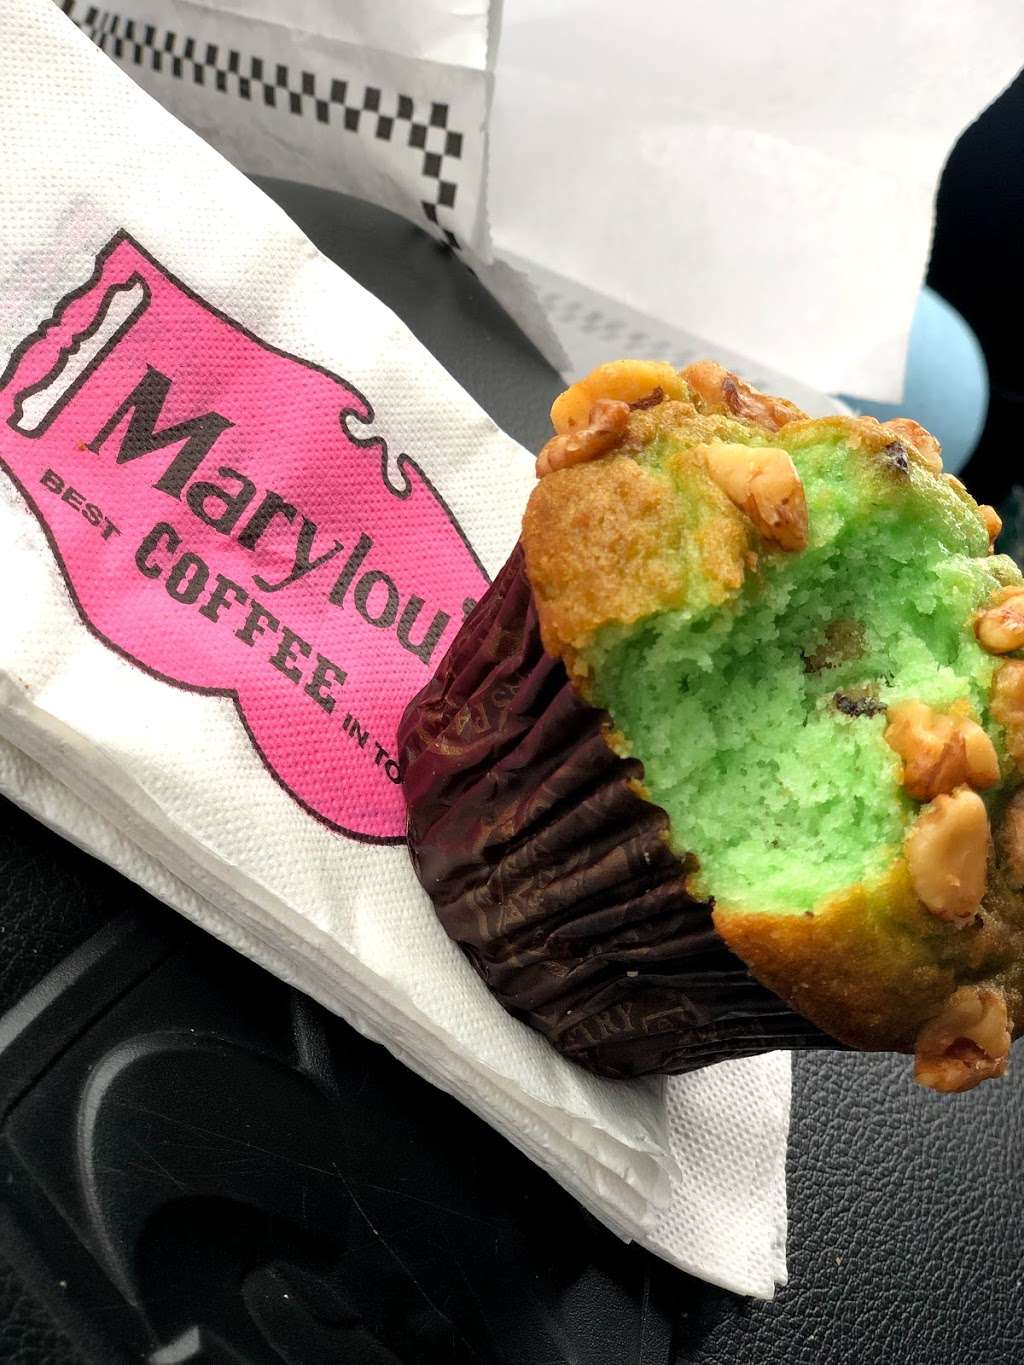 Marylous Coffee | 8 Cranberry Hwy, Rochester, MA 02770, USA | Phone: (774) 213-5870